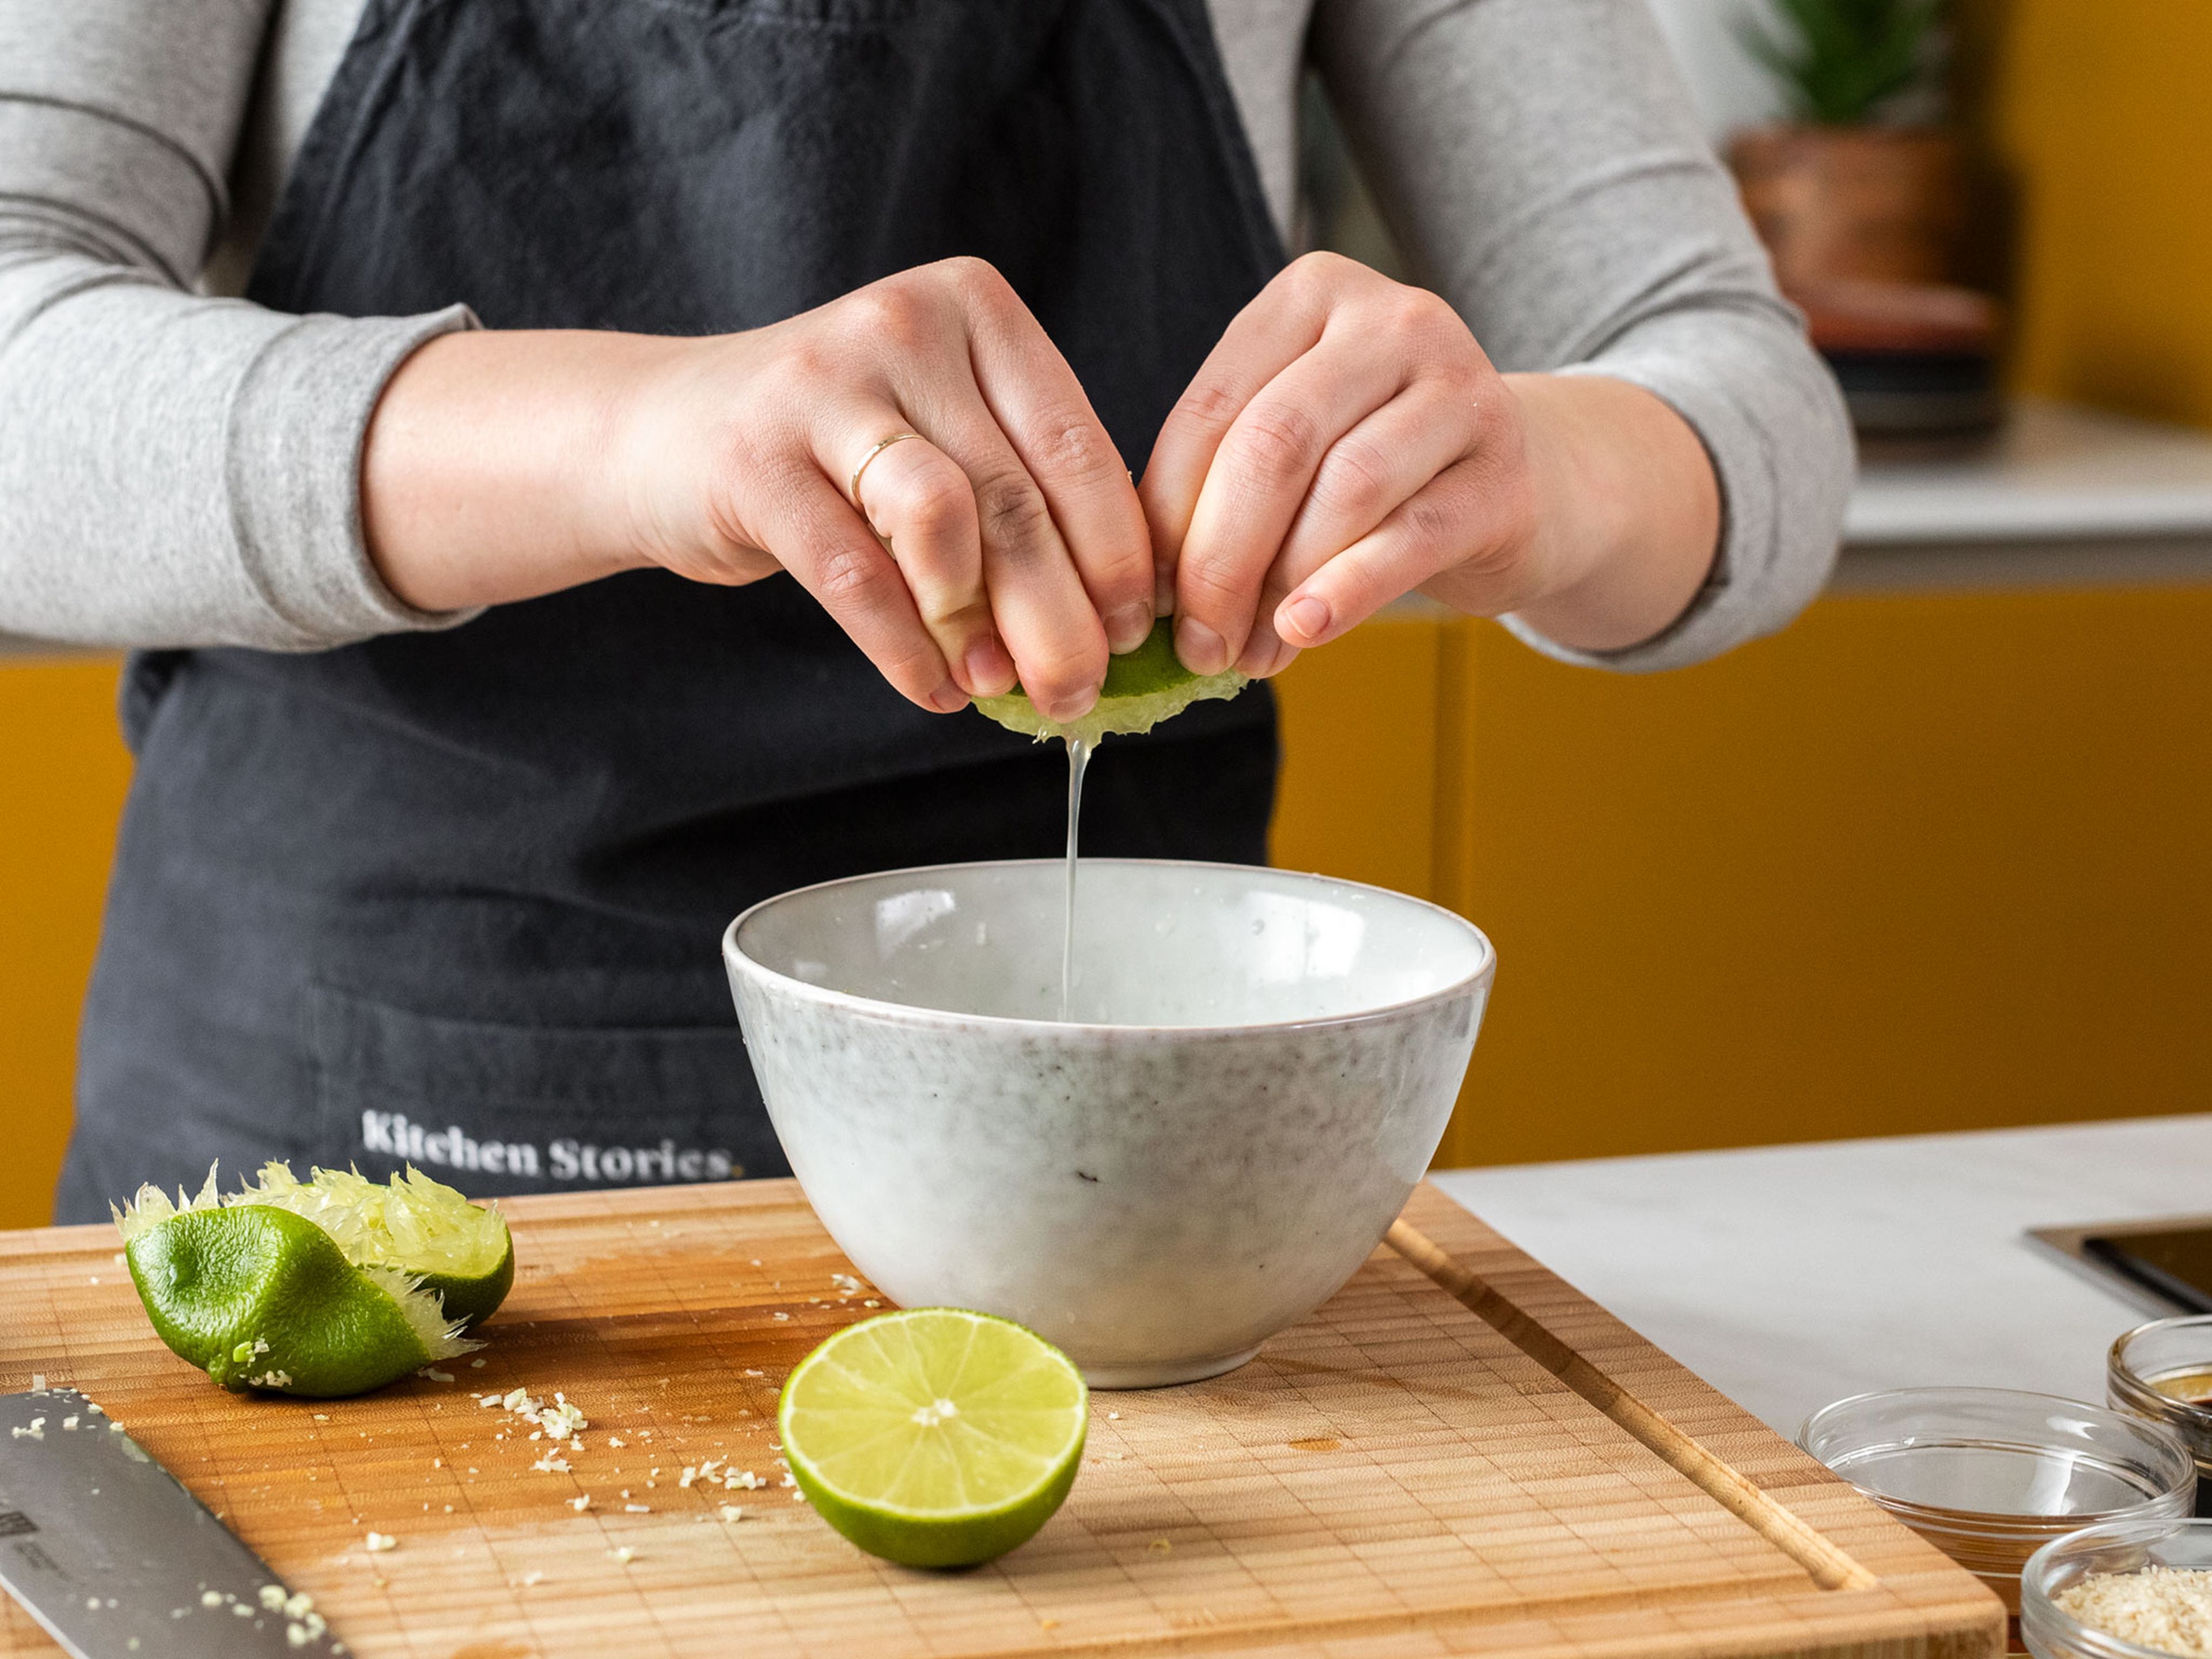 Juice the limes and finely slice chili. Tenderize lemongrass with the back of a knife, then finely slice. In a bowl, combine lemongrass, lime juice, sesame oil, soy sauce, sugar, rice vinegar, and chili. Mix well.